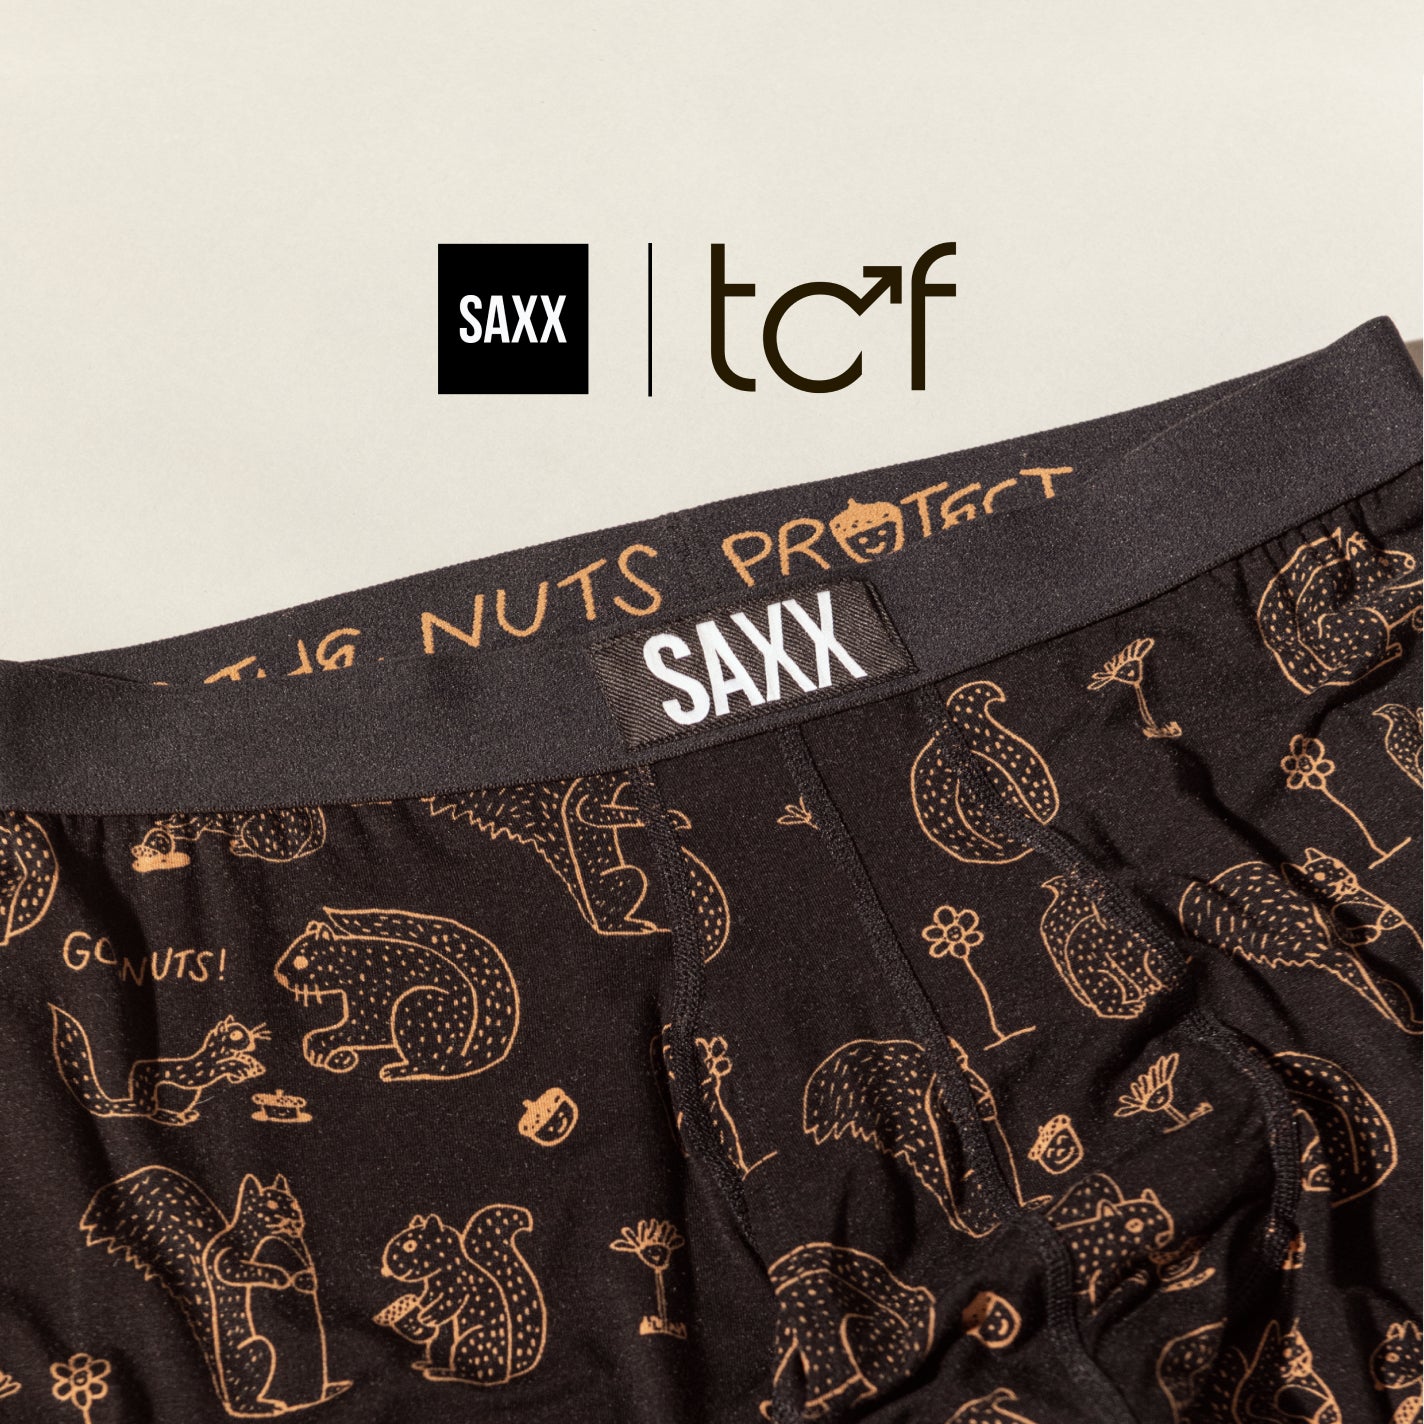 SAXX and Testicular Cancer Foundation logos overlaying a photo of black boxer briefs in a squirrel print